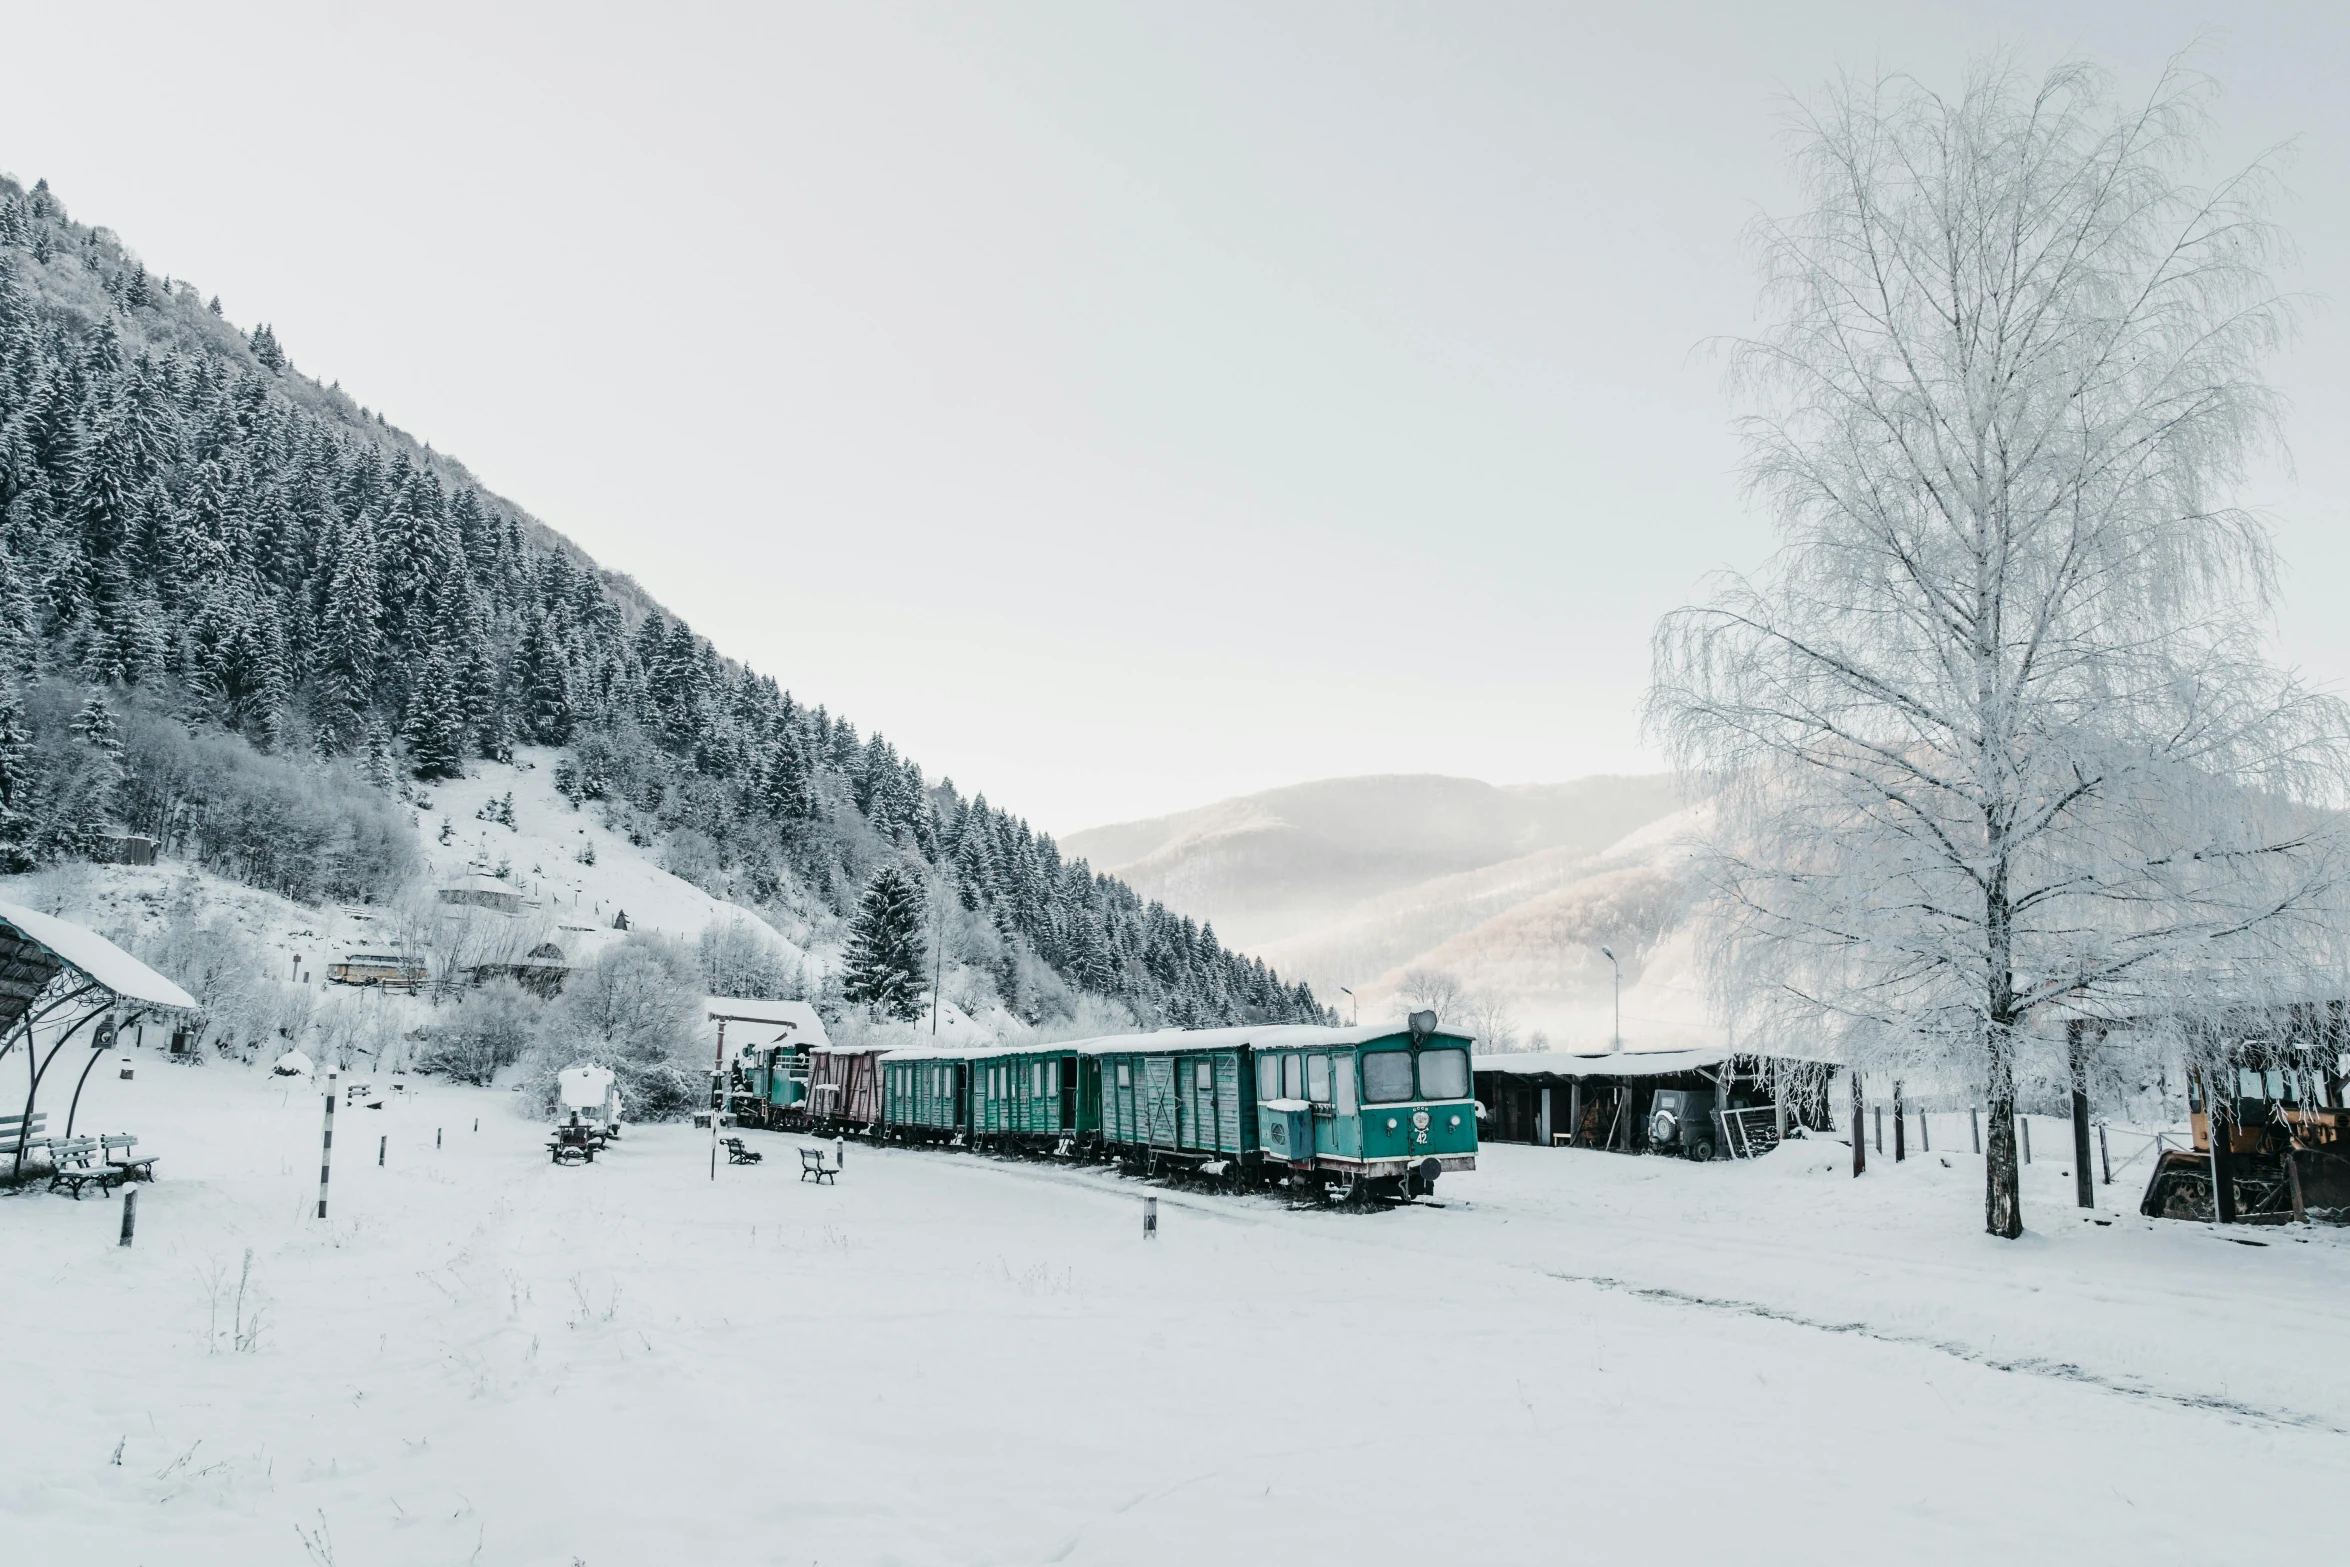 train on track near snowy forest in alpine area